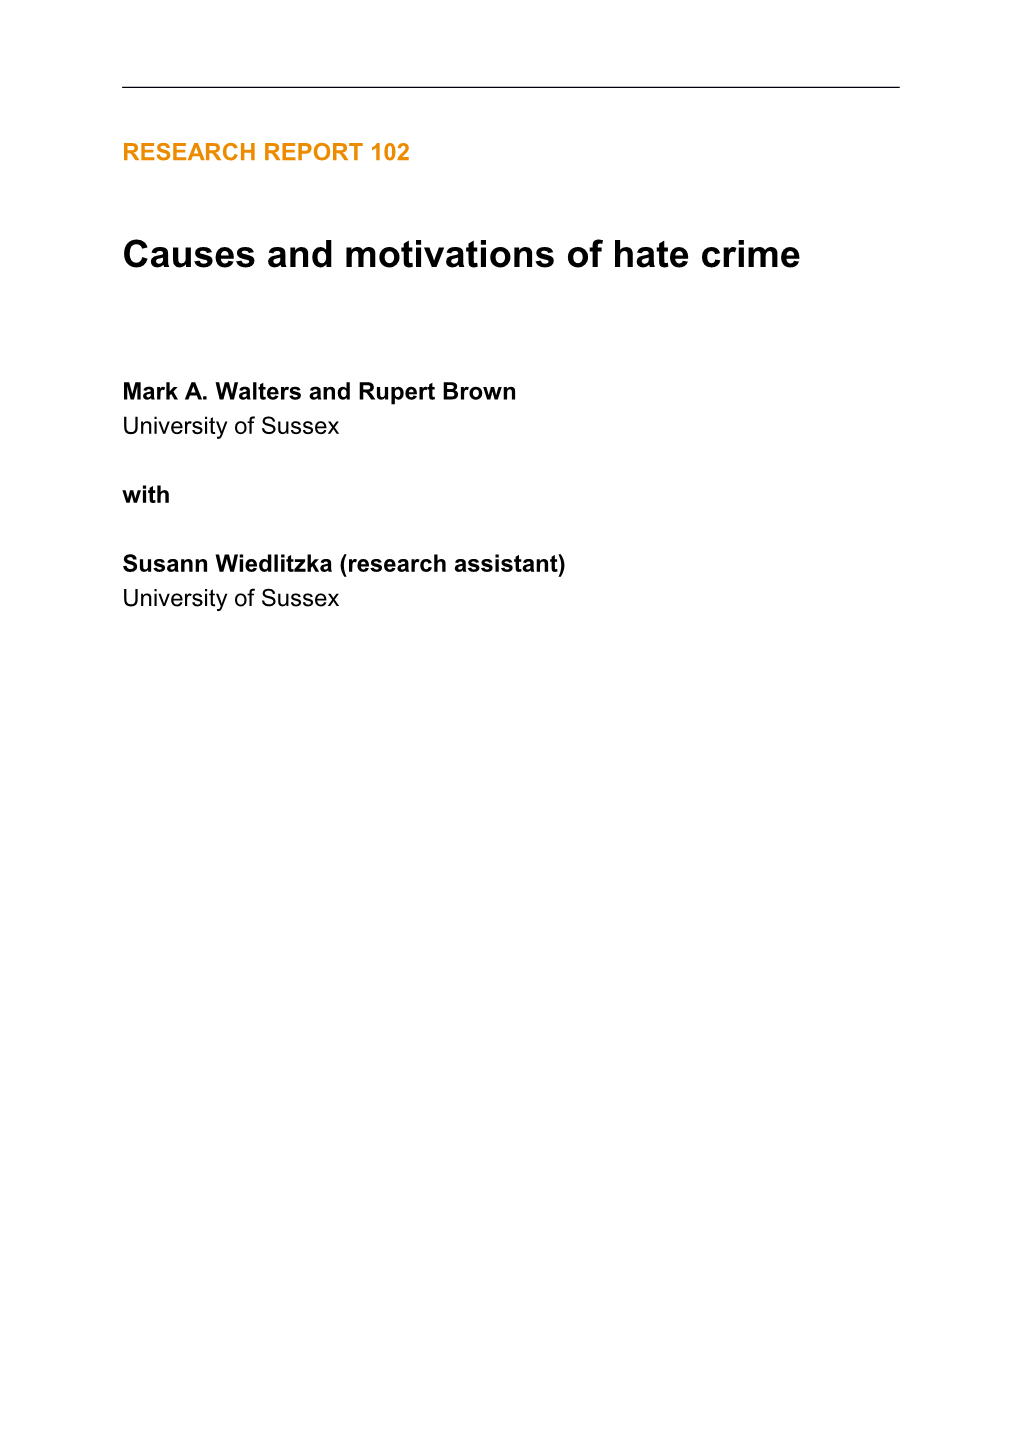 Causes and Motivations of Hate Crime